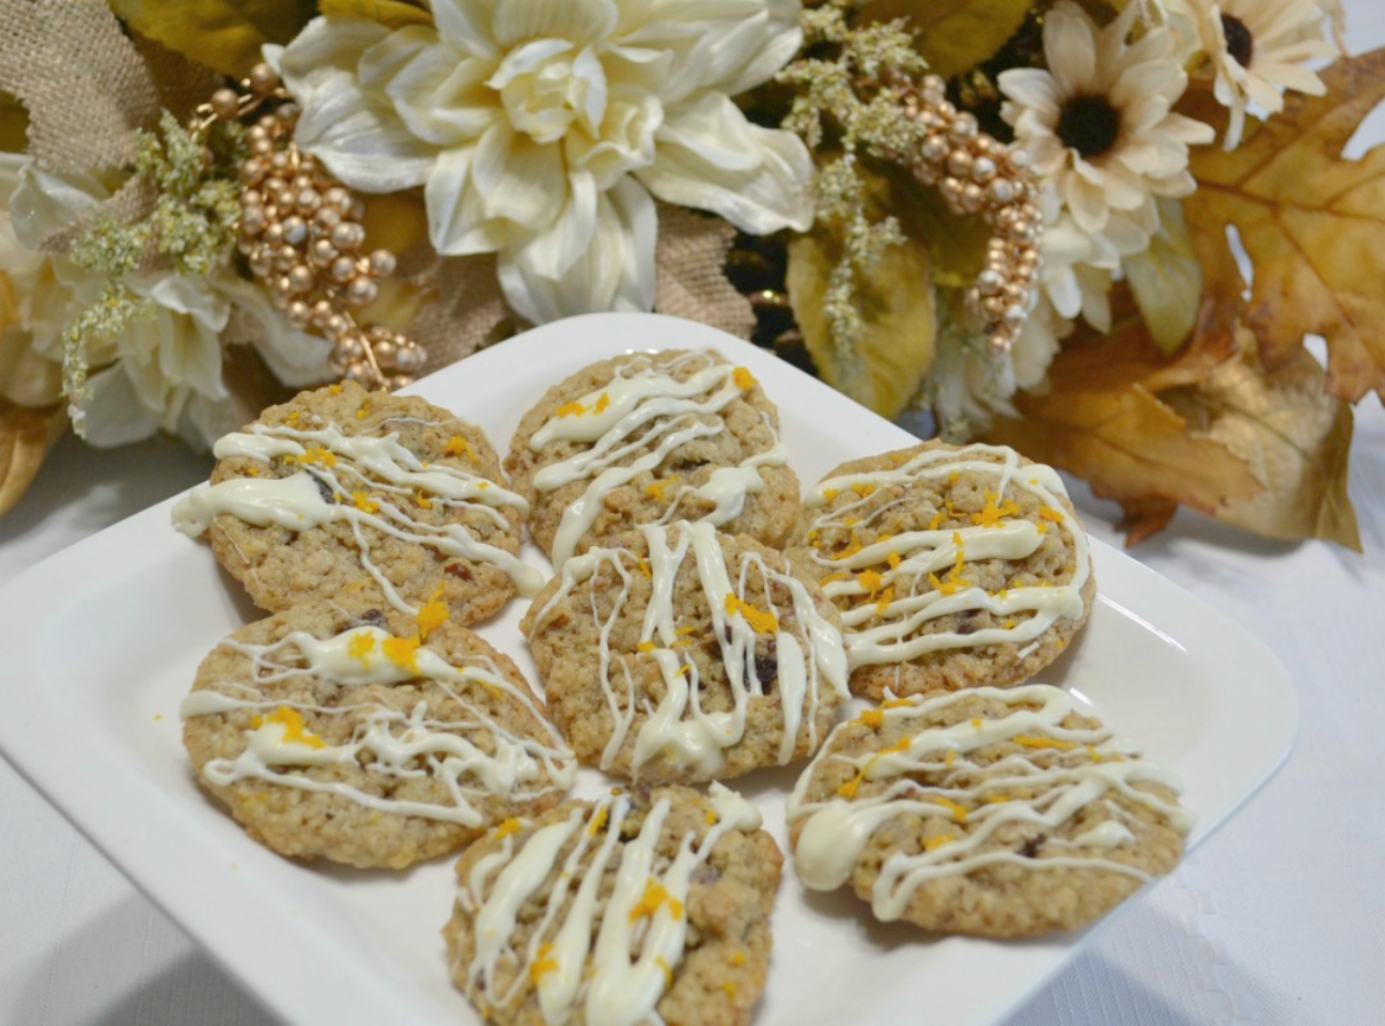 A flavorful oatmeal cookie packed with flavors from cranberry, pecans, and orange zest topped with a melted white chocolate drizzle.